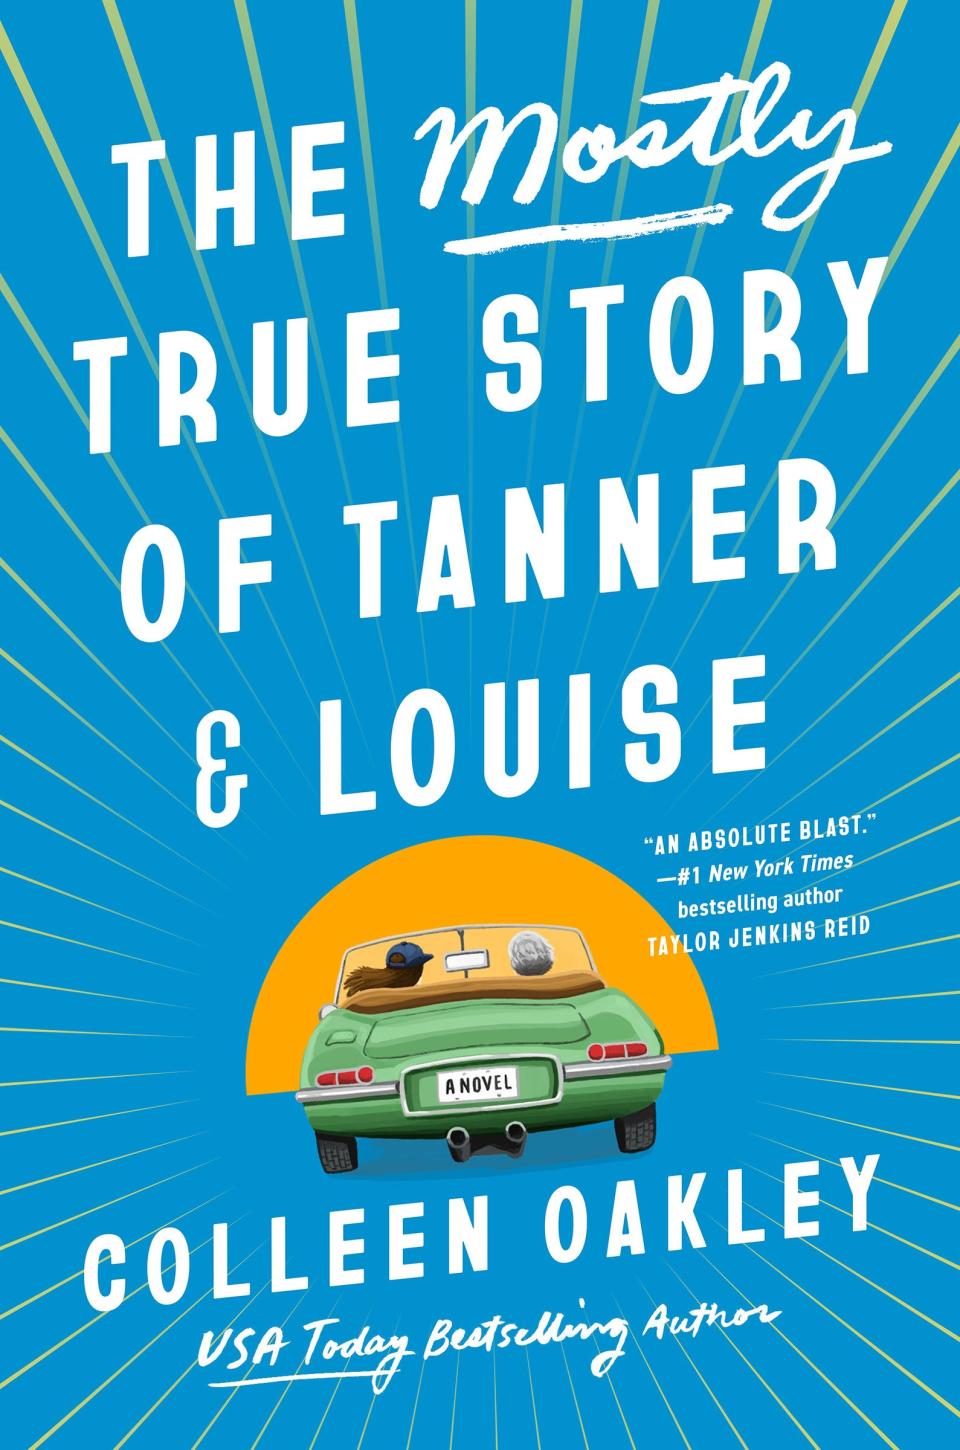 “The Mostly True Story of Tanner & Louise” by Colleen Oakley.